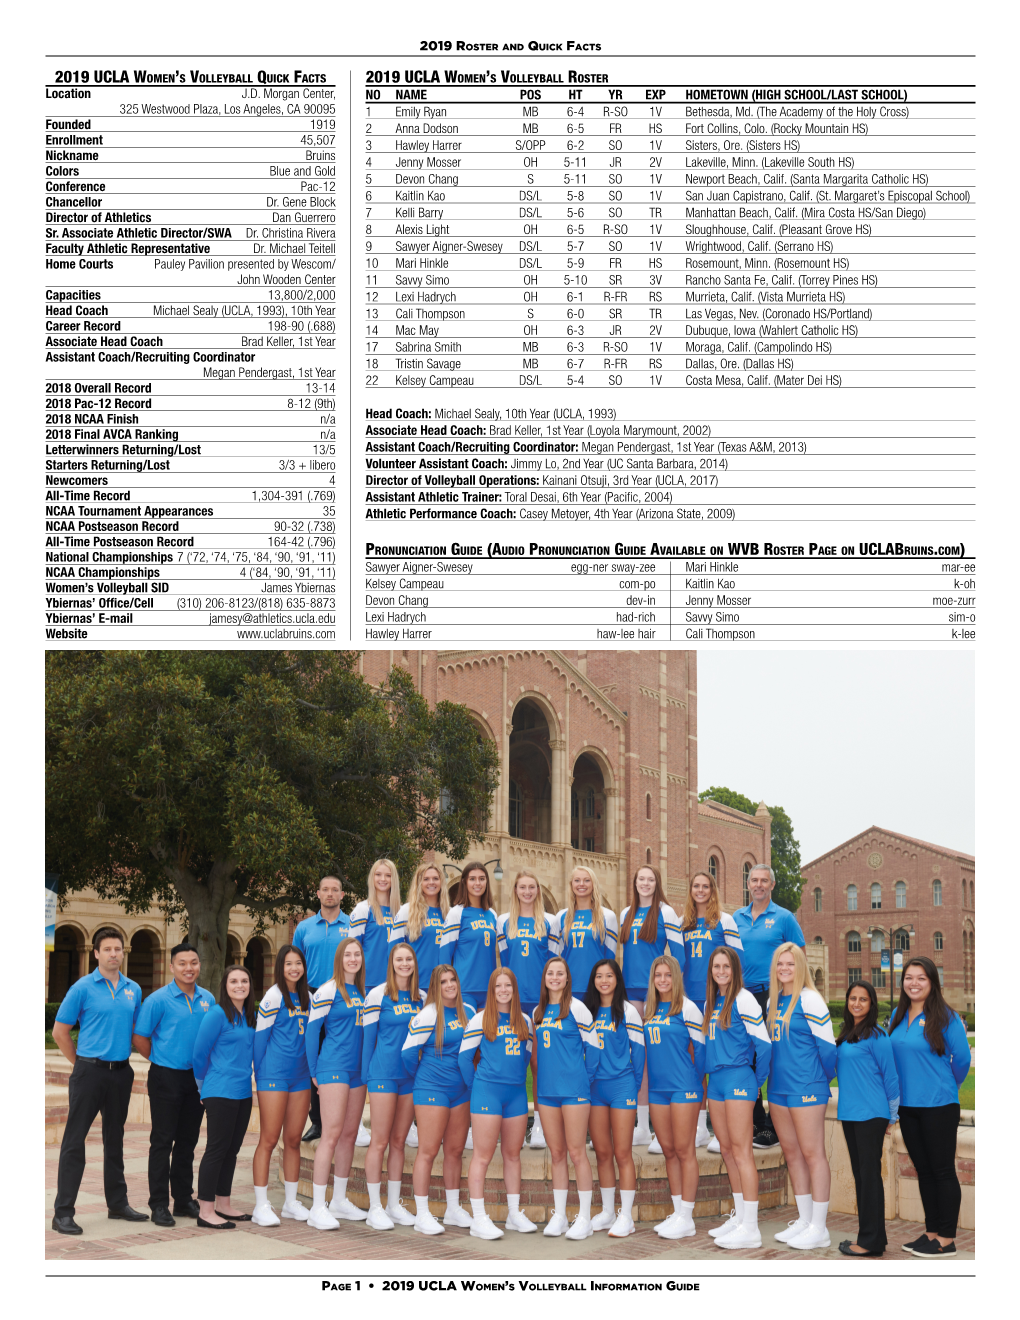 2019 Ucla Women's Volleyball Quick Facts 2019 Ucla